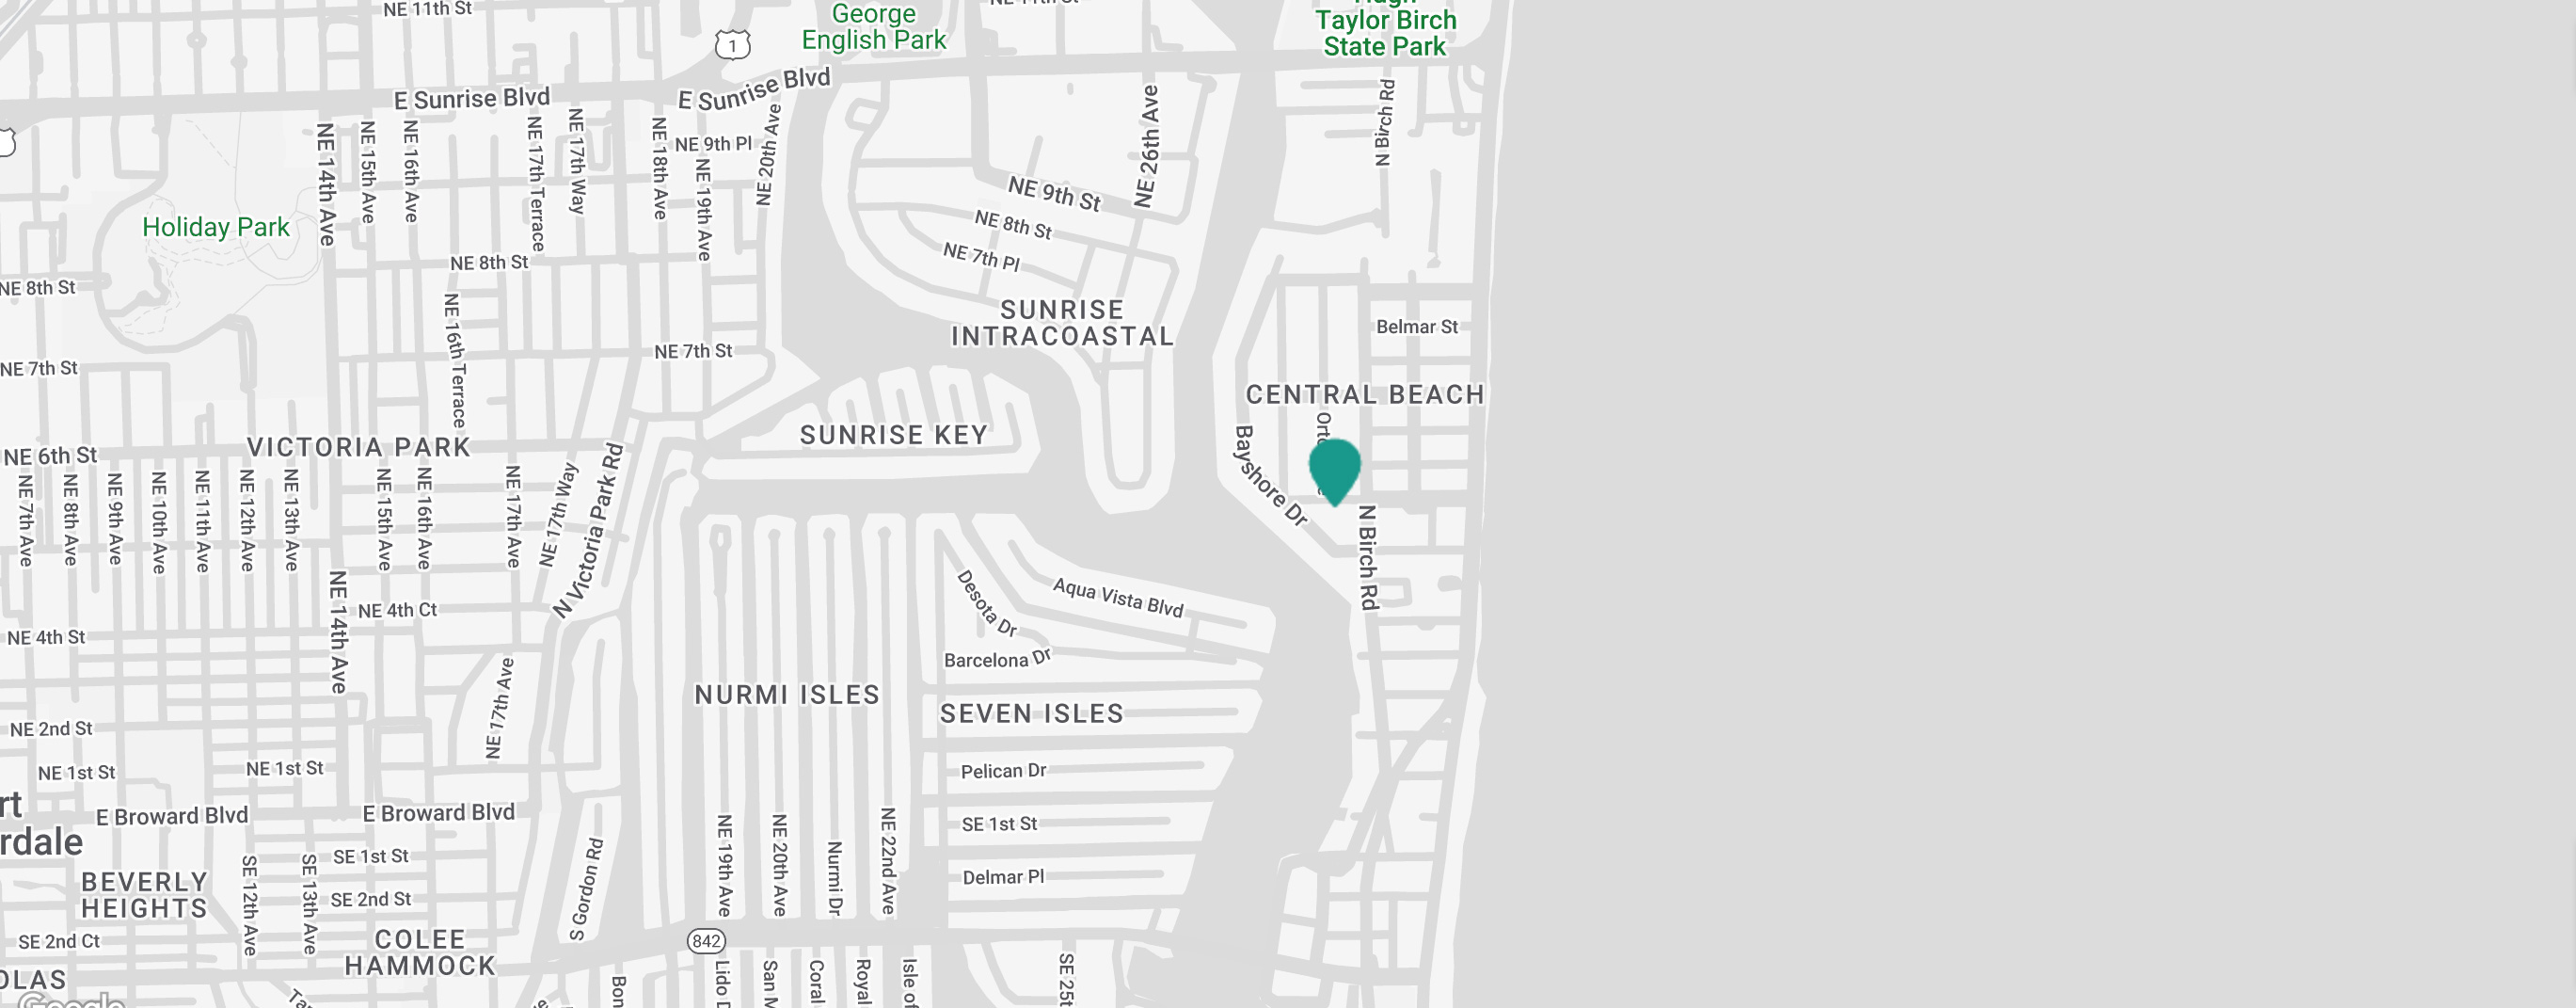 Static Google Map image of Shorebreak Hotel location using teal colored map pin - links out to Google Maps website